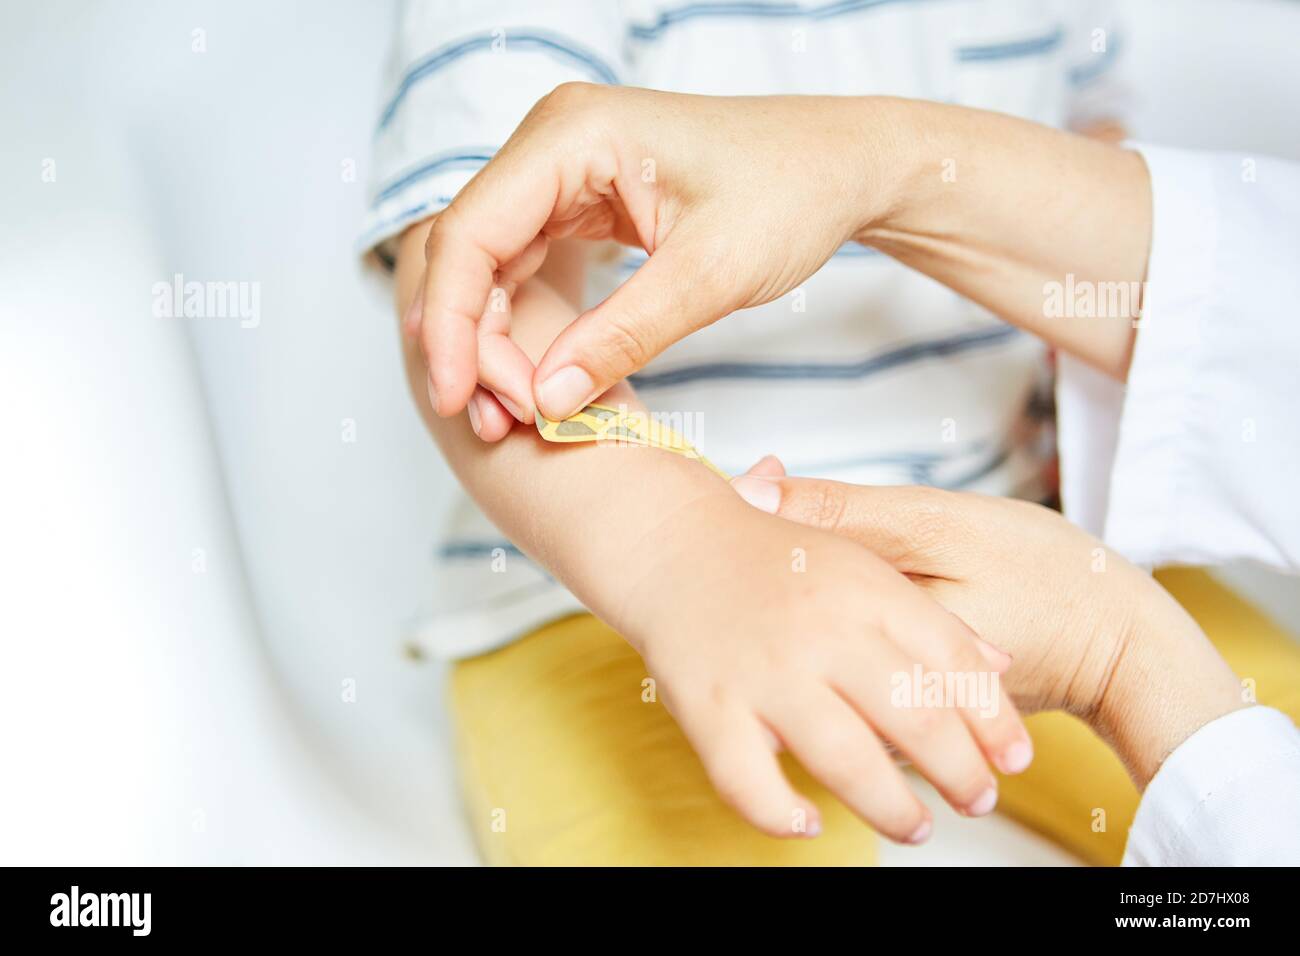 Pediatrician puts a plaster on the hand of a child with a sprain or bruise Stock Photo